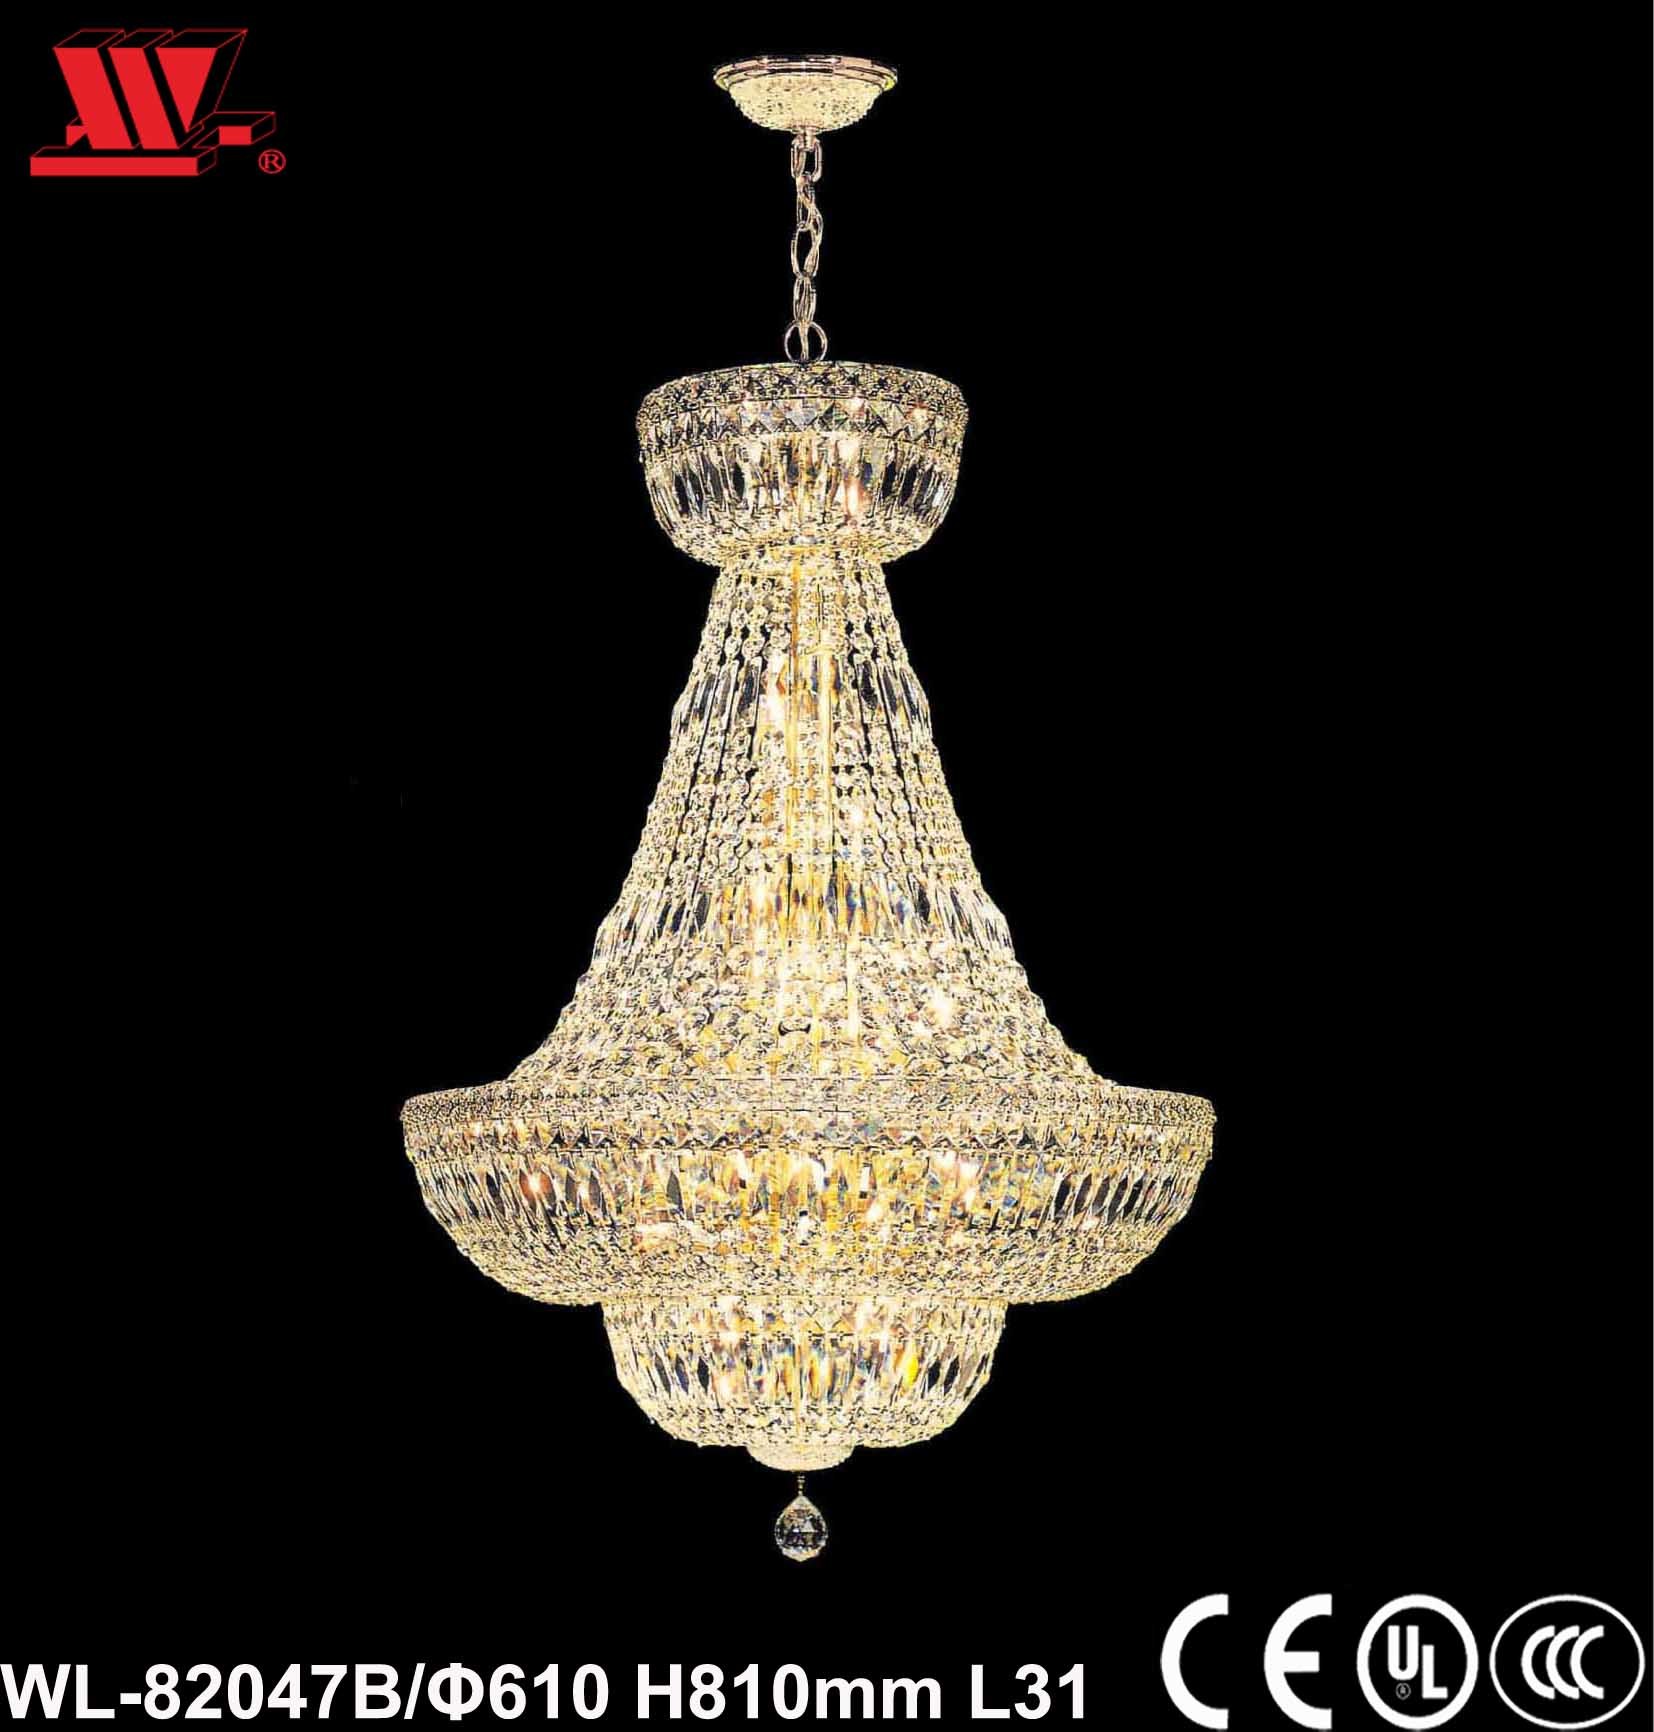 Crystal Chandelier with Glass Chains Wl-82047b